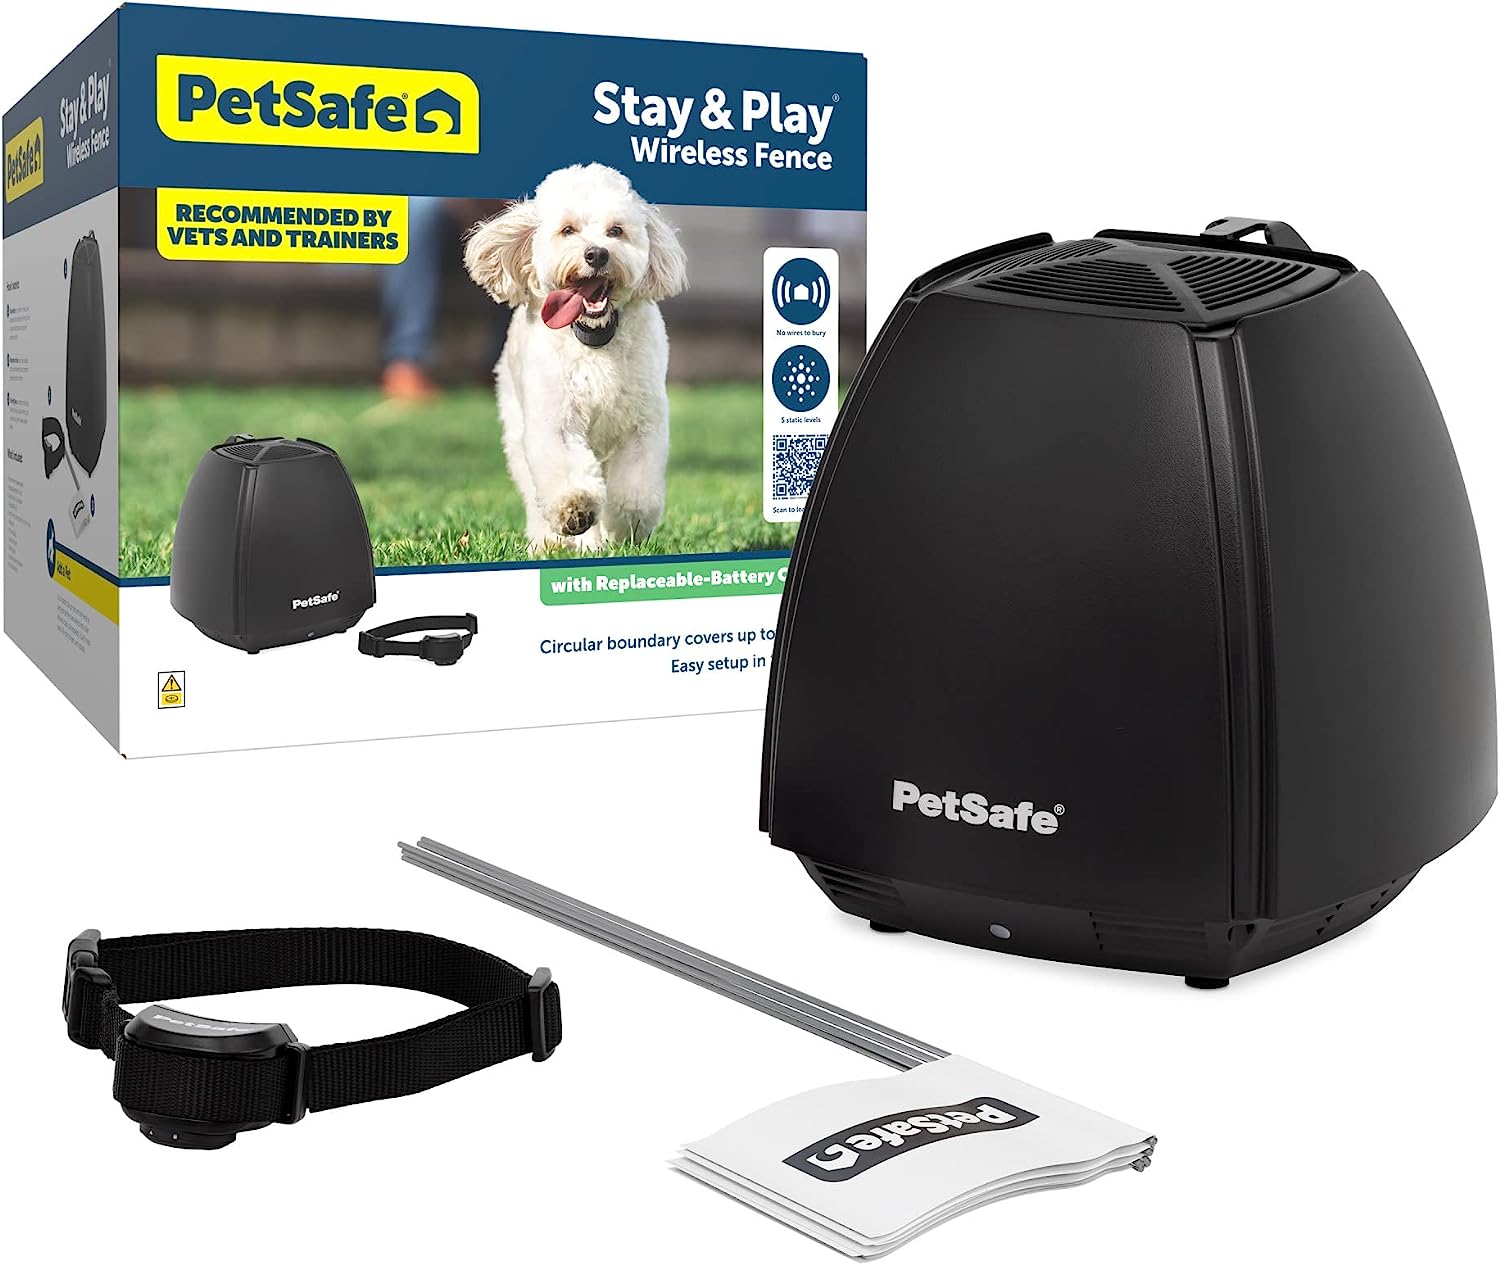 PetSafe Stay  Play Wireless Pet Fence  Replaceable Battery Collar - Circular Boundary Secures up to 3/4 Acre Yard, No-Dig, Americas Safest Wireless Fence From Parent Company INVISIBLE FENCE Brand